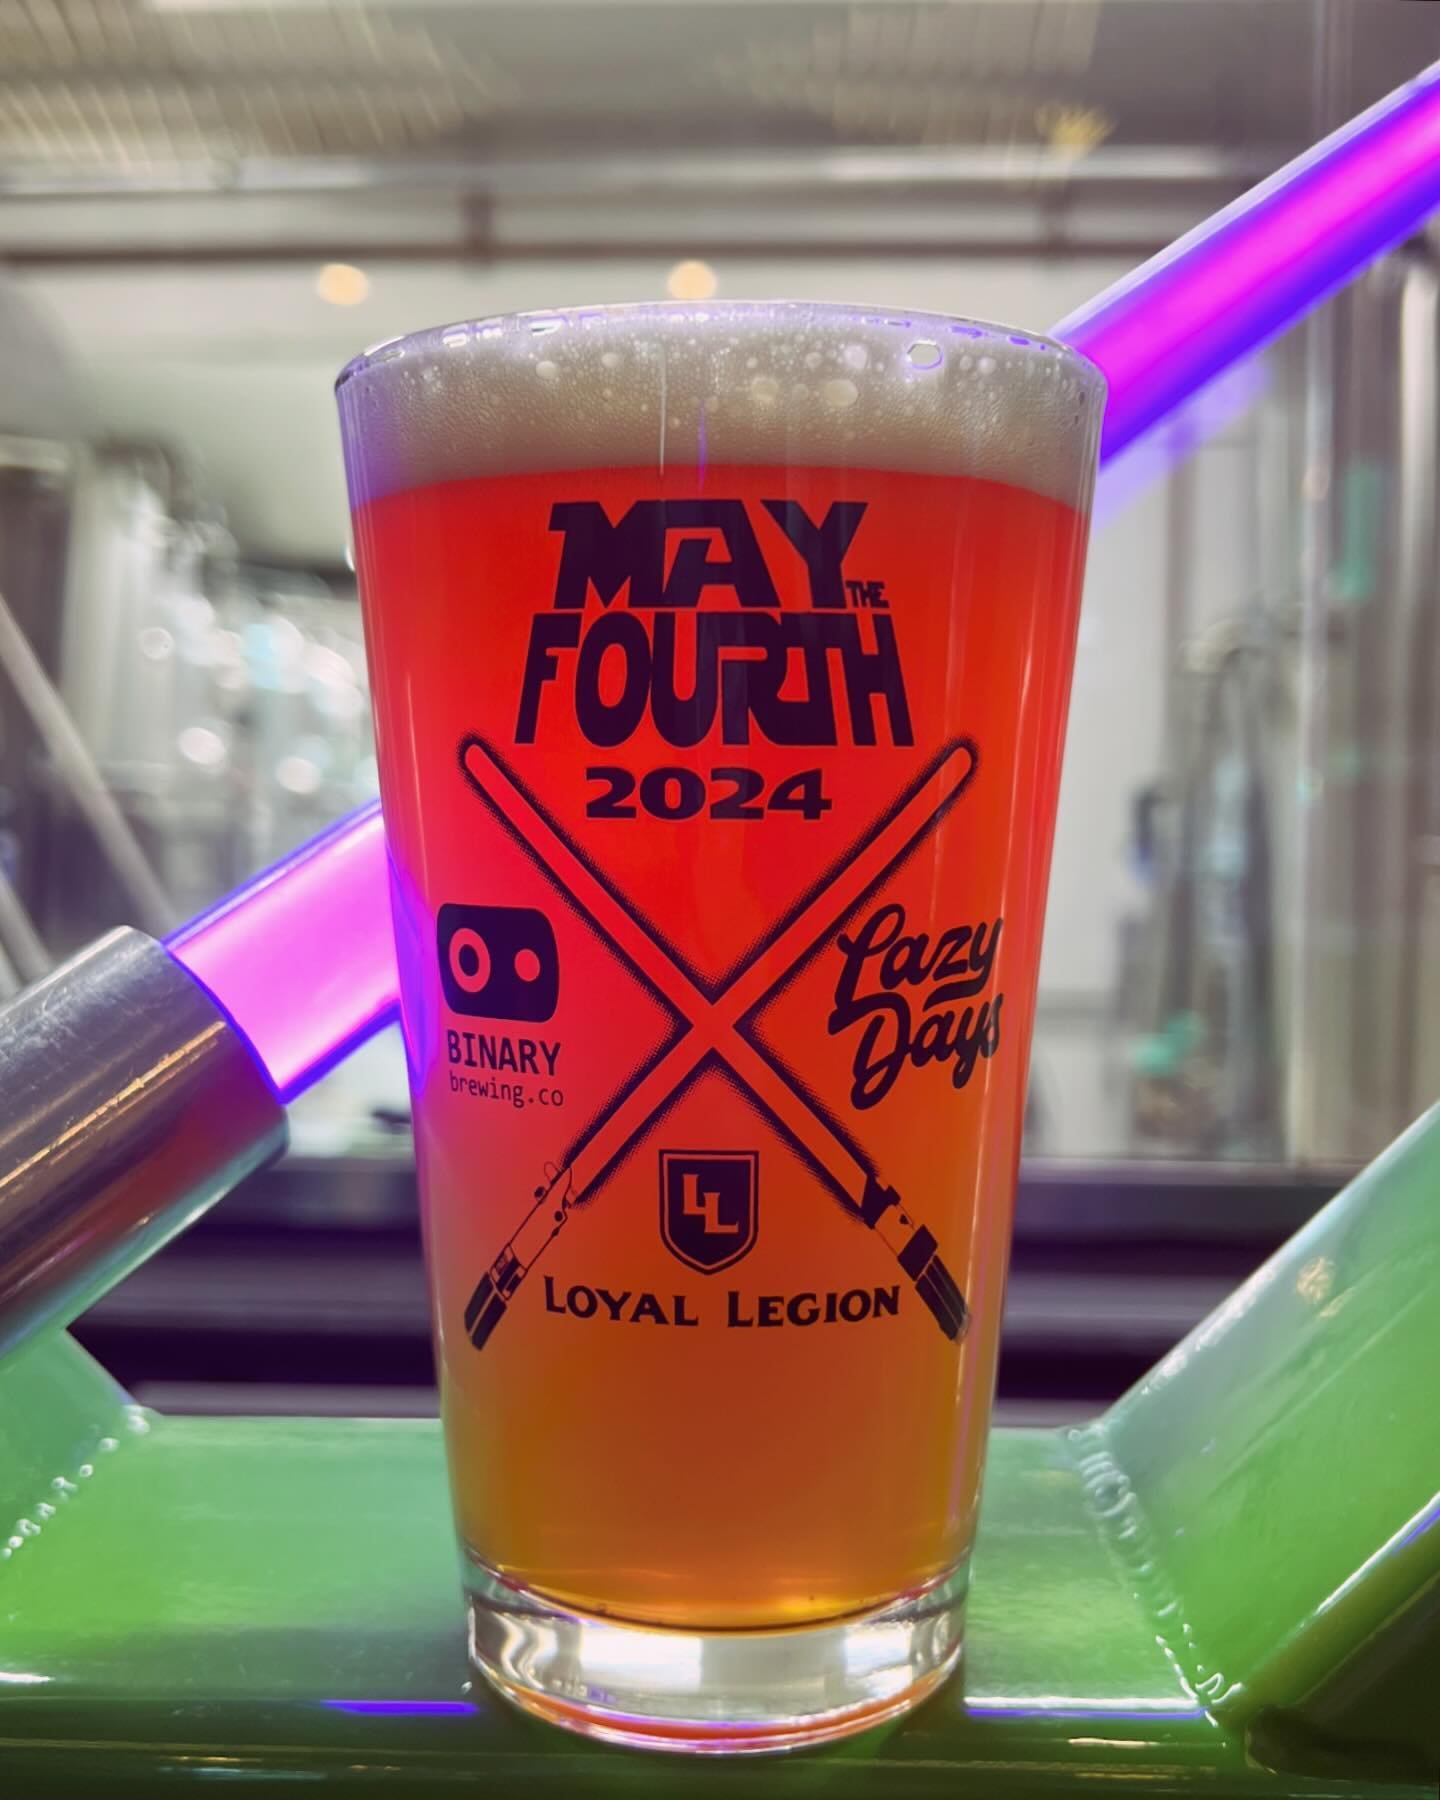 May the Fourth be with you&hellip;
✨
Dueling IPAs tapped today
Brewed with @loyallegionoregon &amp; @lazydaysbrewing 
⚔️
Plus films 🎥 food specials 🍔 scavenger hunts &amp; more! 
*costumes encouraged*